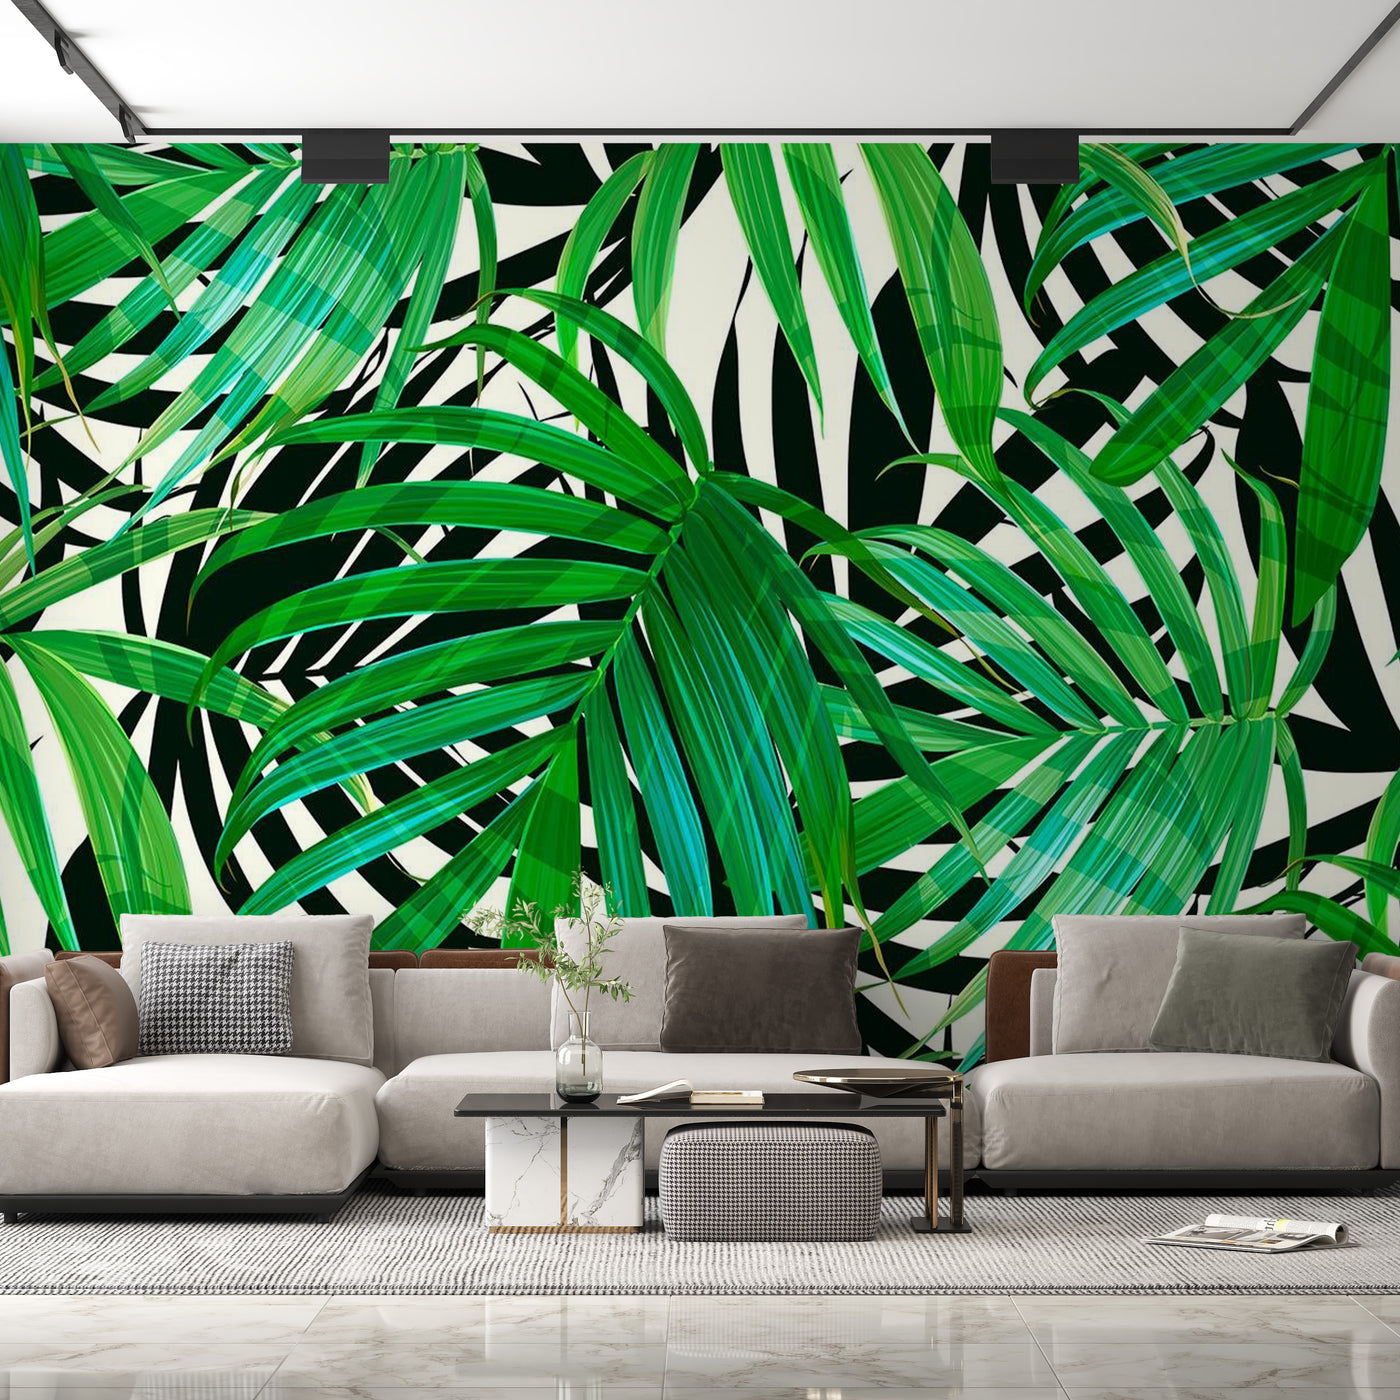 Peel & Stick Botanical Wall Mural - Tropical Leaves - Removable Wall Decals